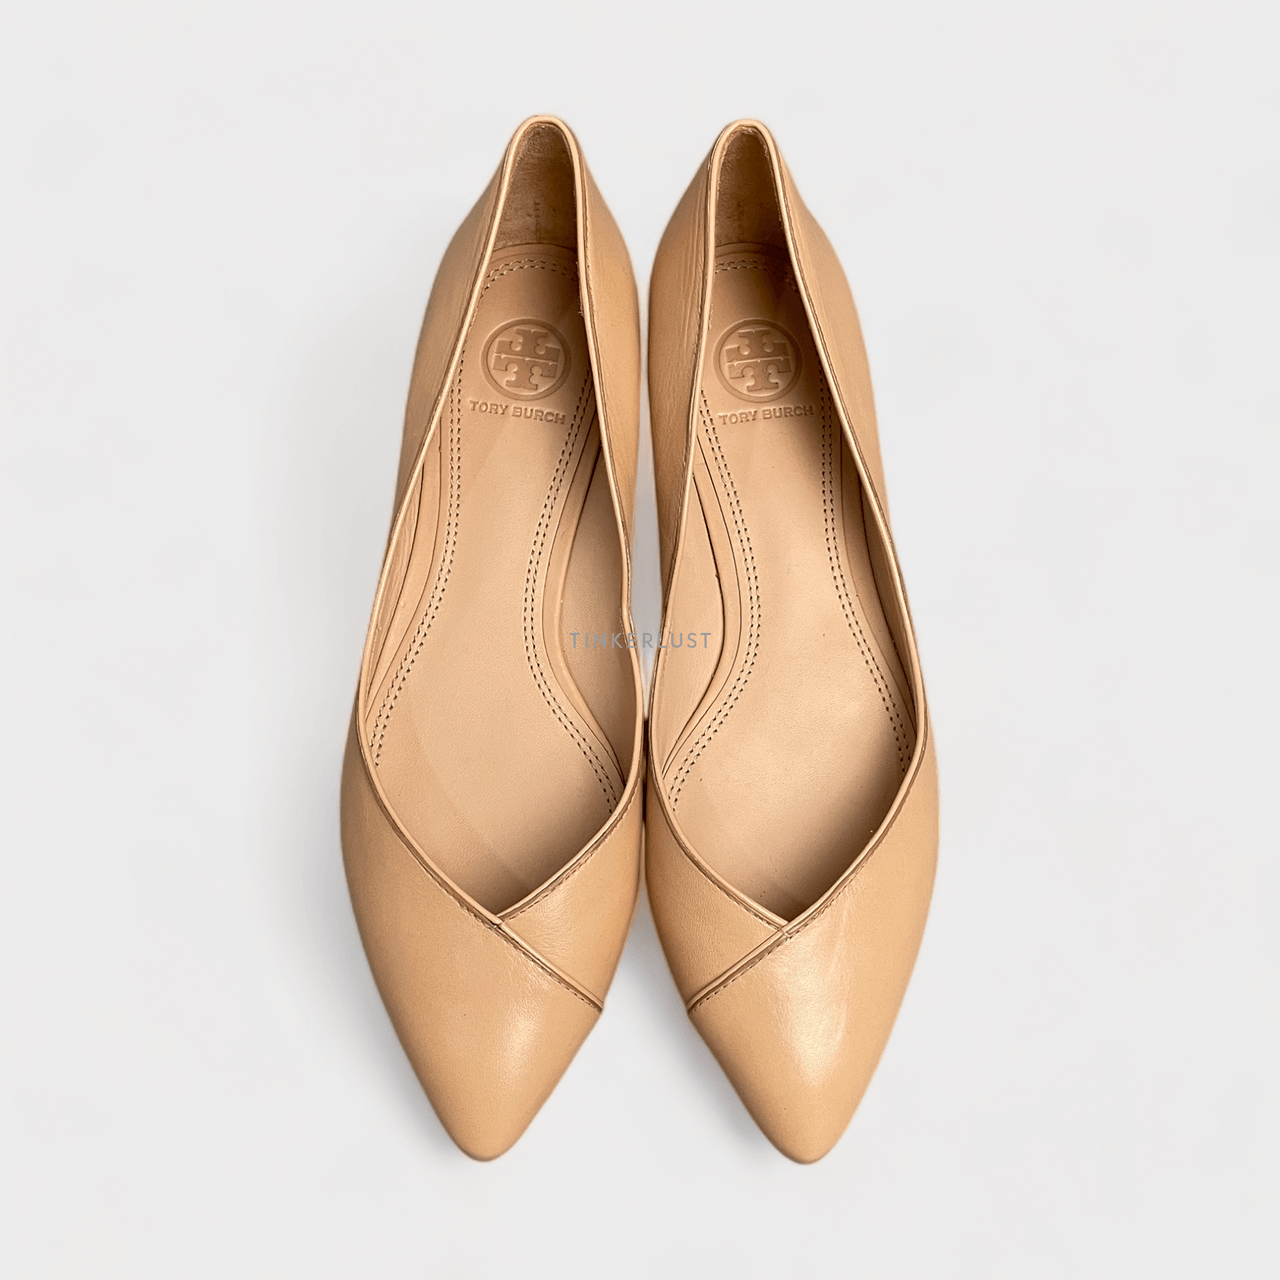 Tory Burch Darley Pointed Toe Nude Leather Flats